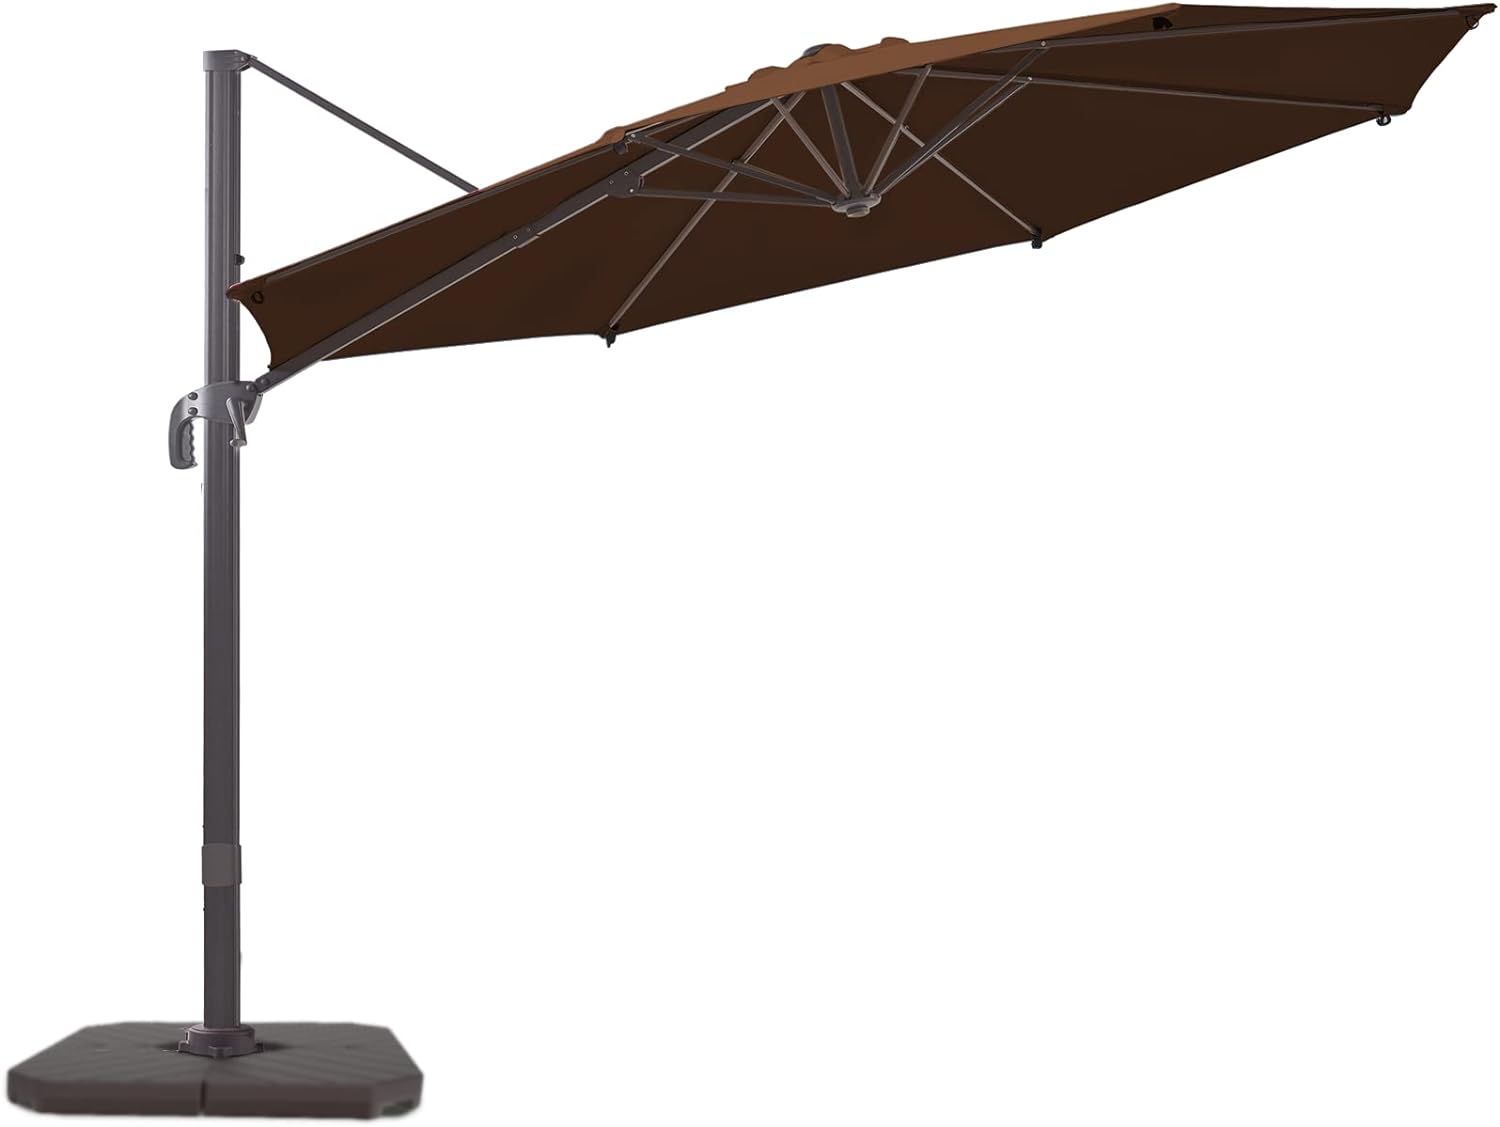 wikiwiki S Series Cantilever Patio Umbrellas 10 FT Outdoor Offset Umbrella/Fade & UV Resistant Solution-dyed Fabric, 5 Level 360 Rotation Aluminum Pole for Deck Pool Backyard Garden, Brown